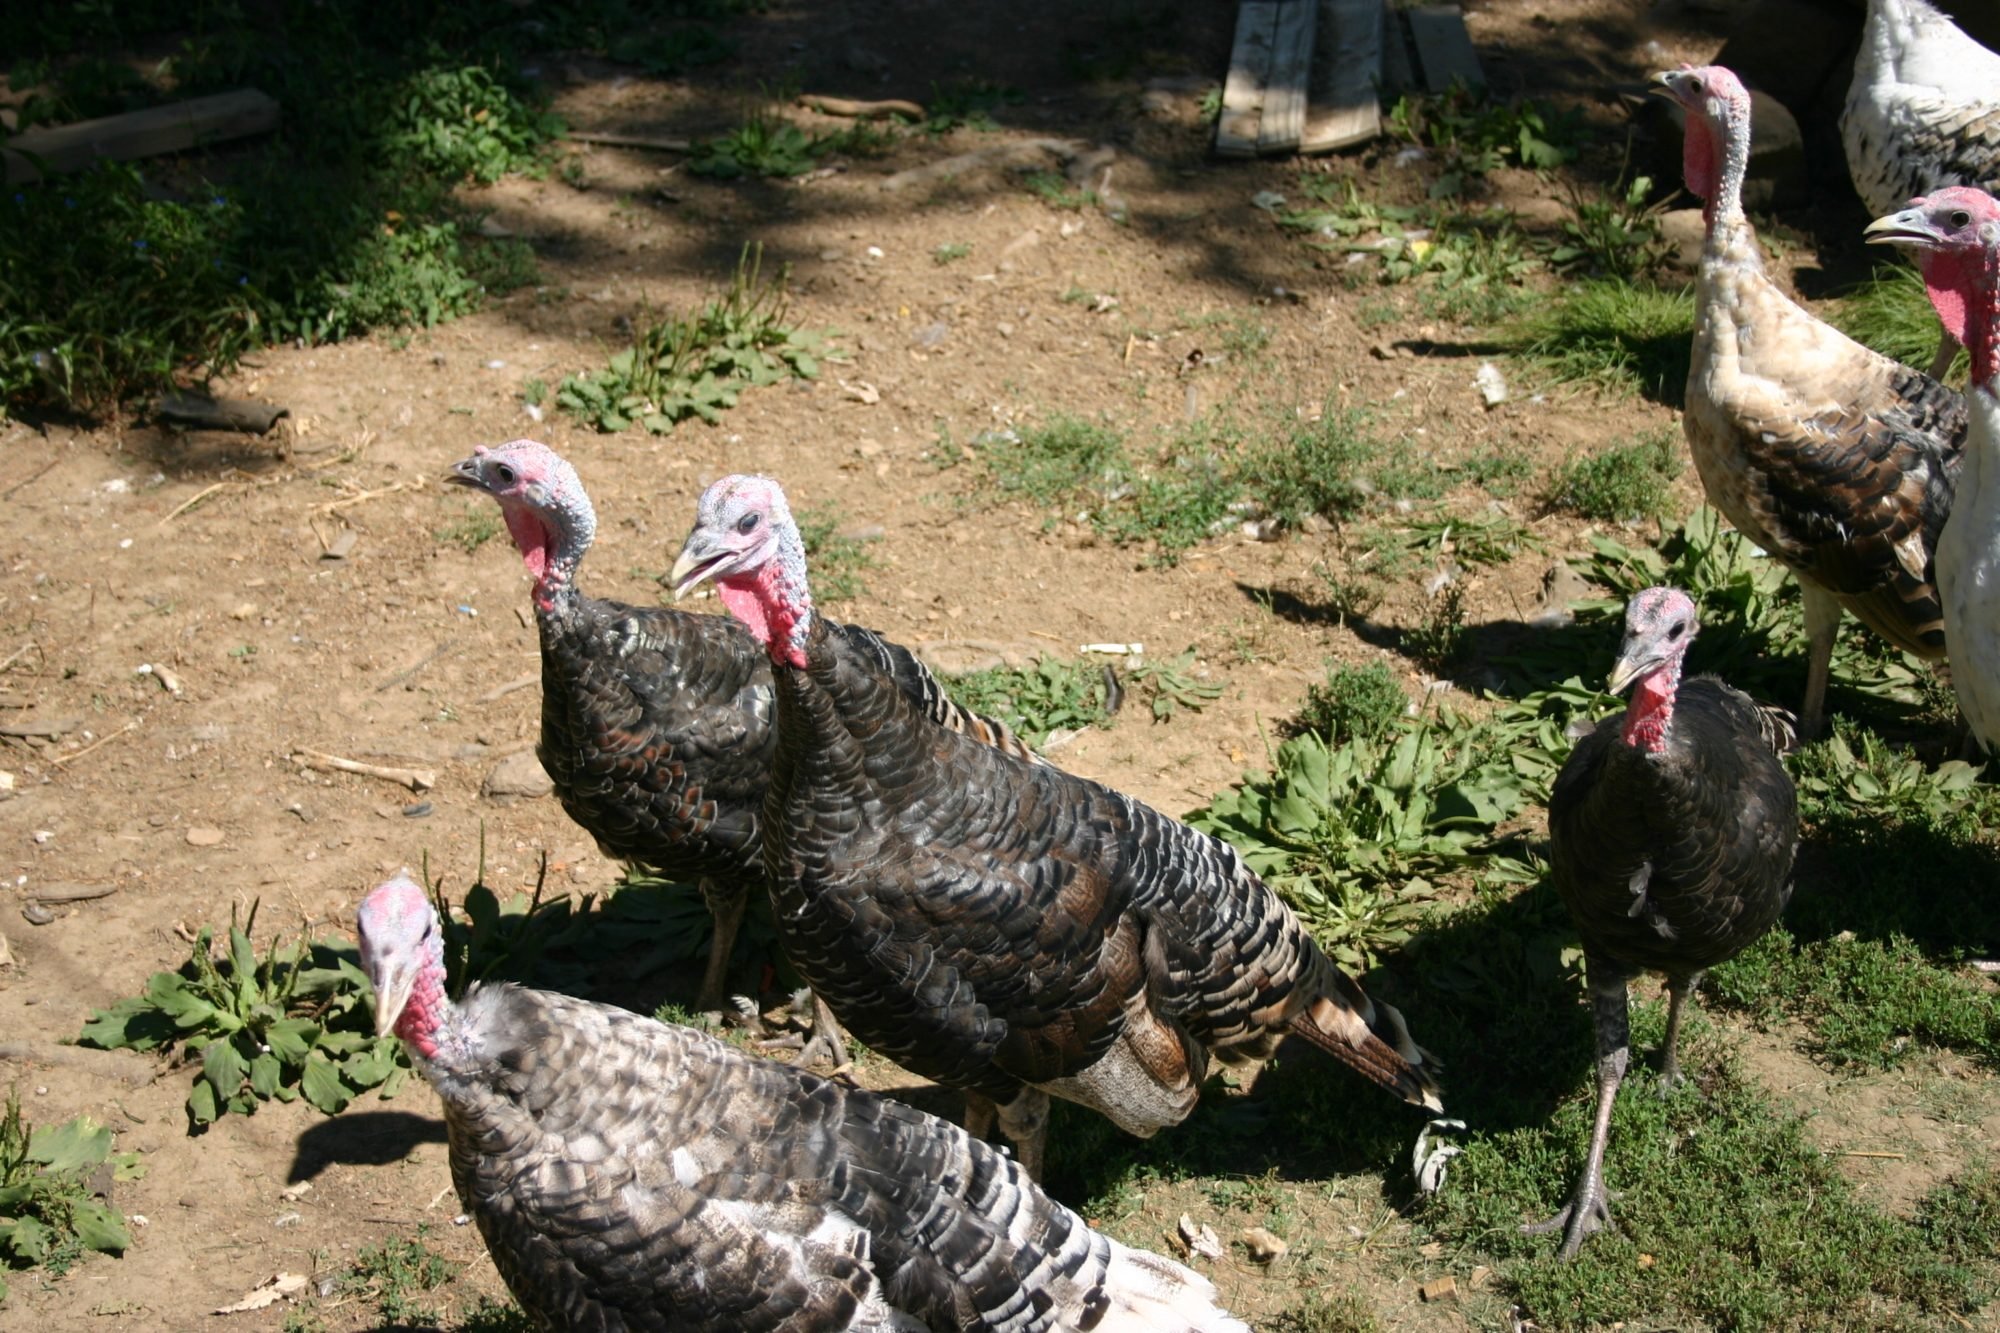 Help Me Identify And Sex This Turkey Turkeys Backyard Chickens Learn How To Raise Chickens